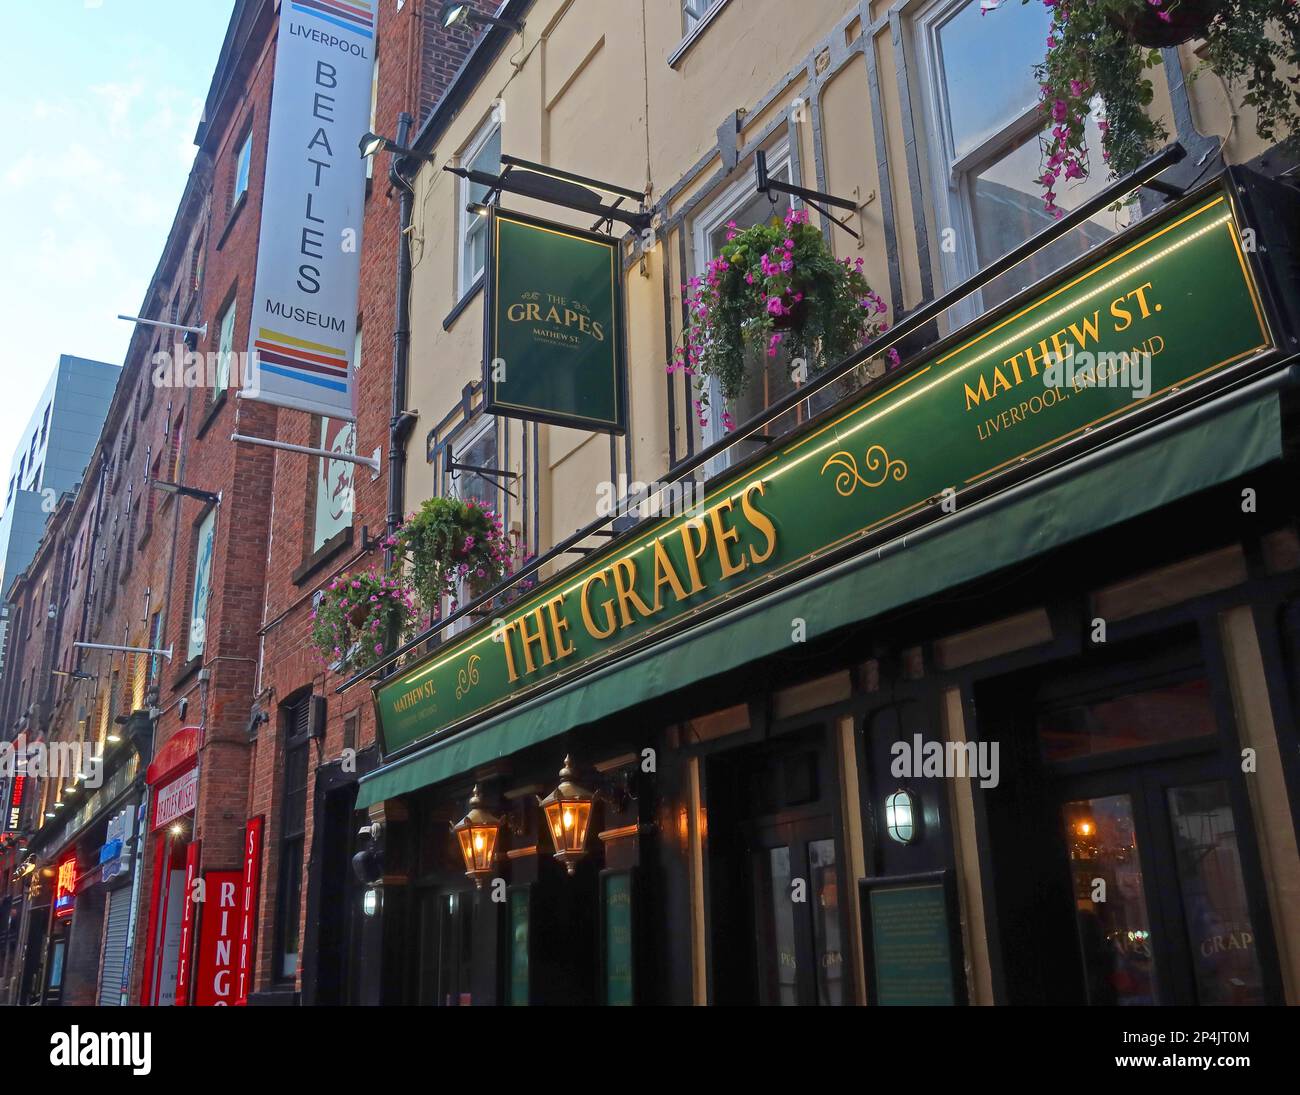 The Grapes pub, where The Beatles sat and drank, 25 Mathew St Liverpool, Merseyside, England, UK, L2 6RE Stock Photo